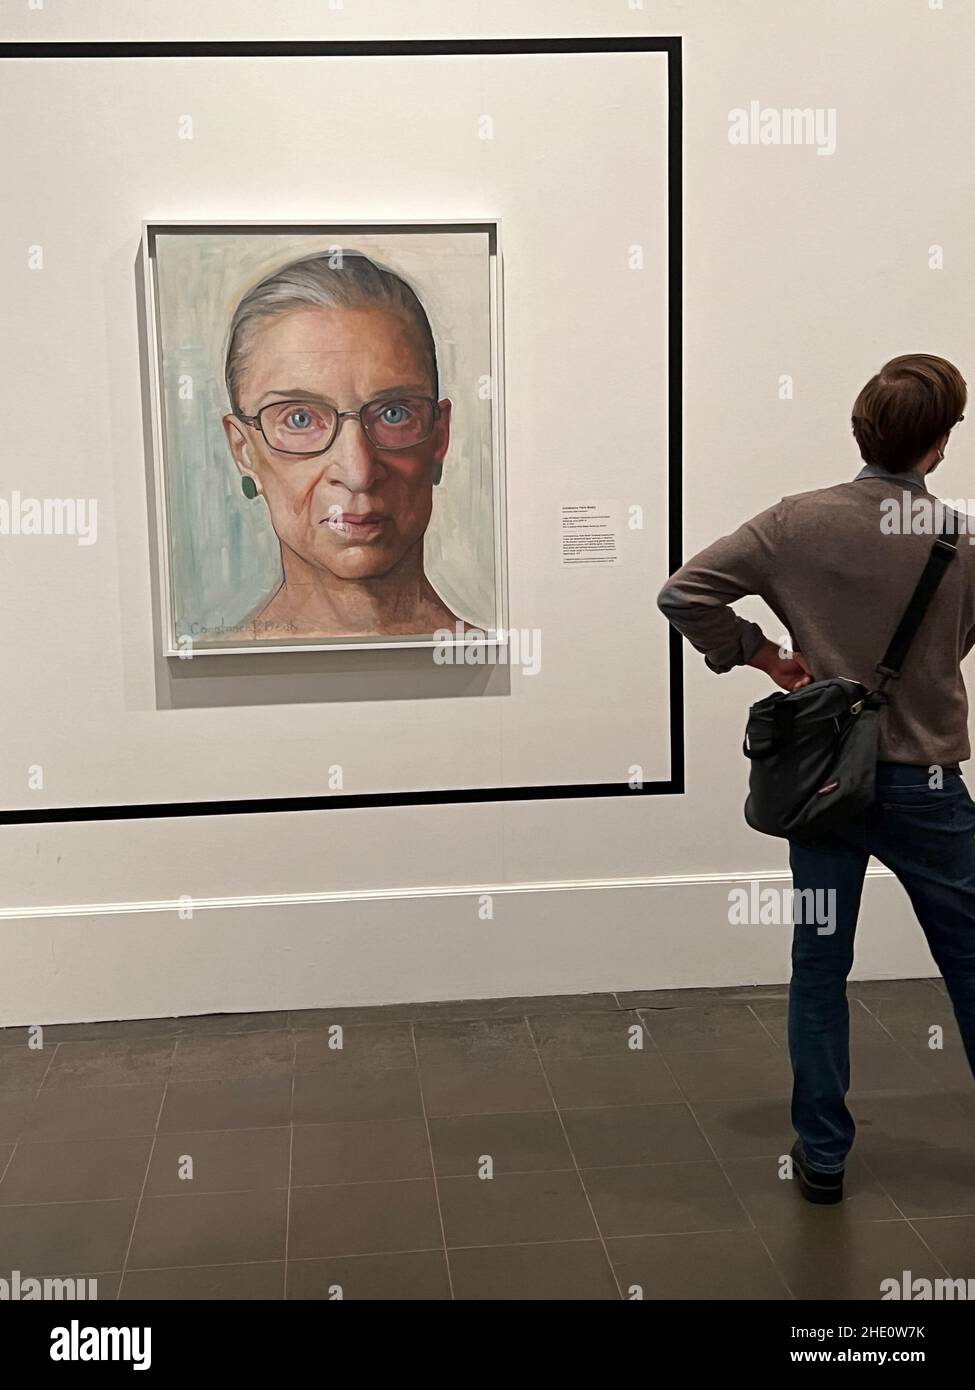 Painting and sculpture honoring Brooklyn born, Ruth Bader Ginsburg and her ongoing fight for justice throughout her career. Painting by Constance Peck Beaty; Vase by artist duo Crank takes a playful approach. emphasizing Ginsburg's broader popular culture appeal. Stock Photo